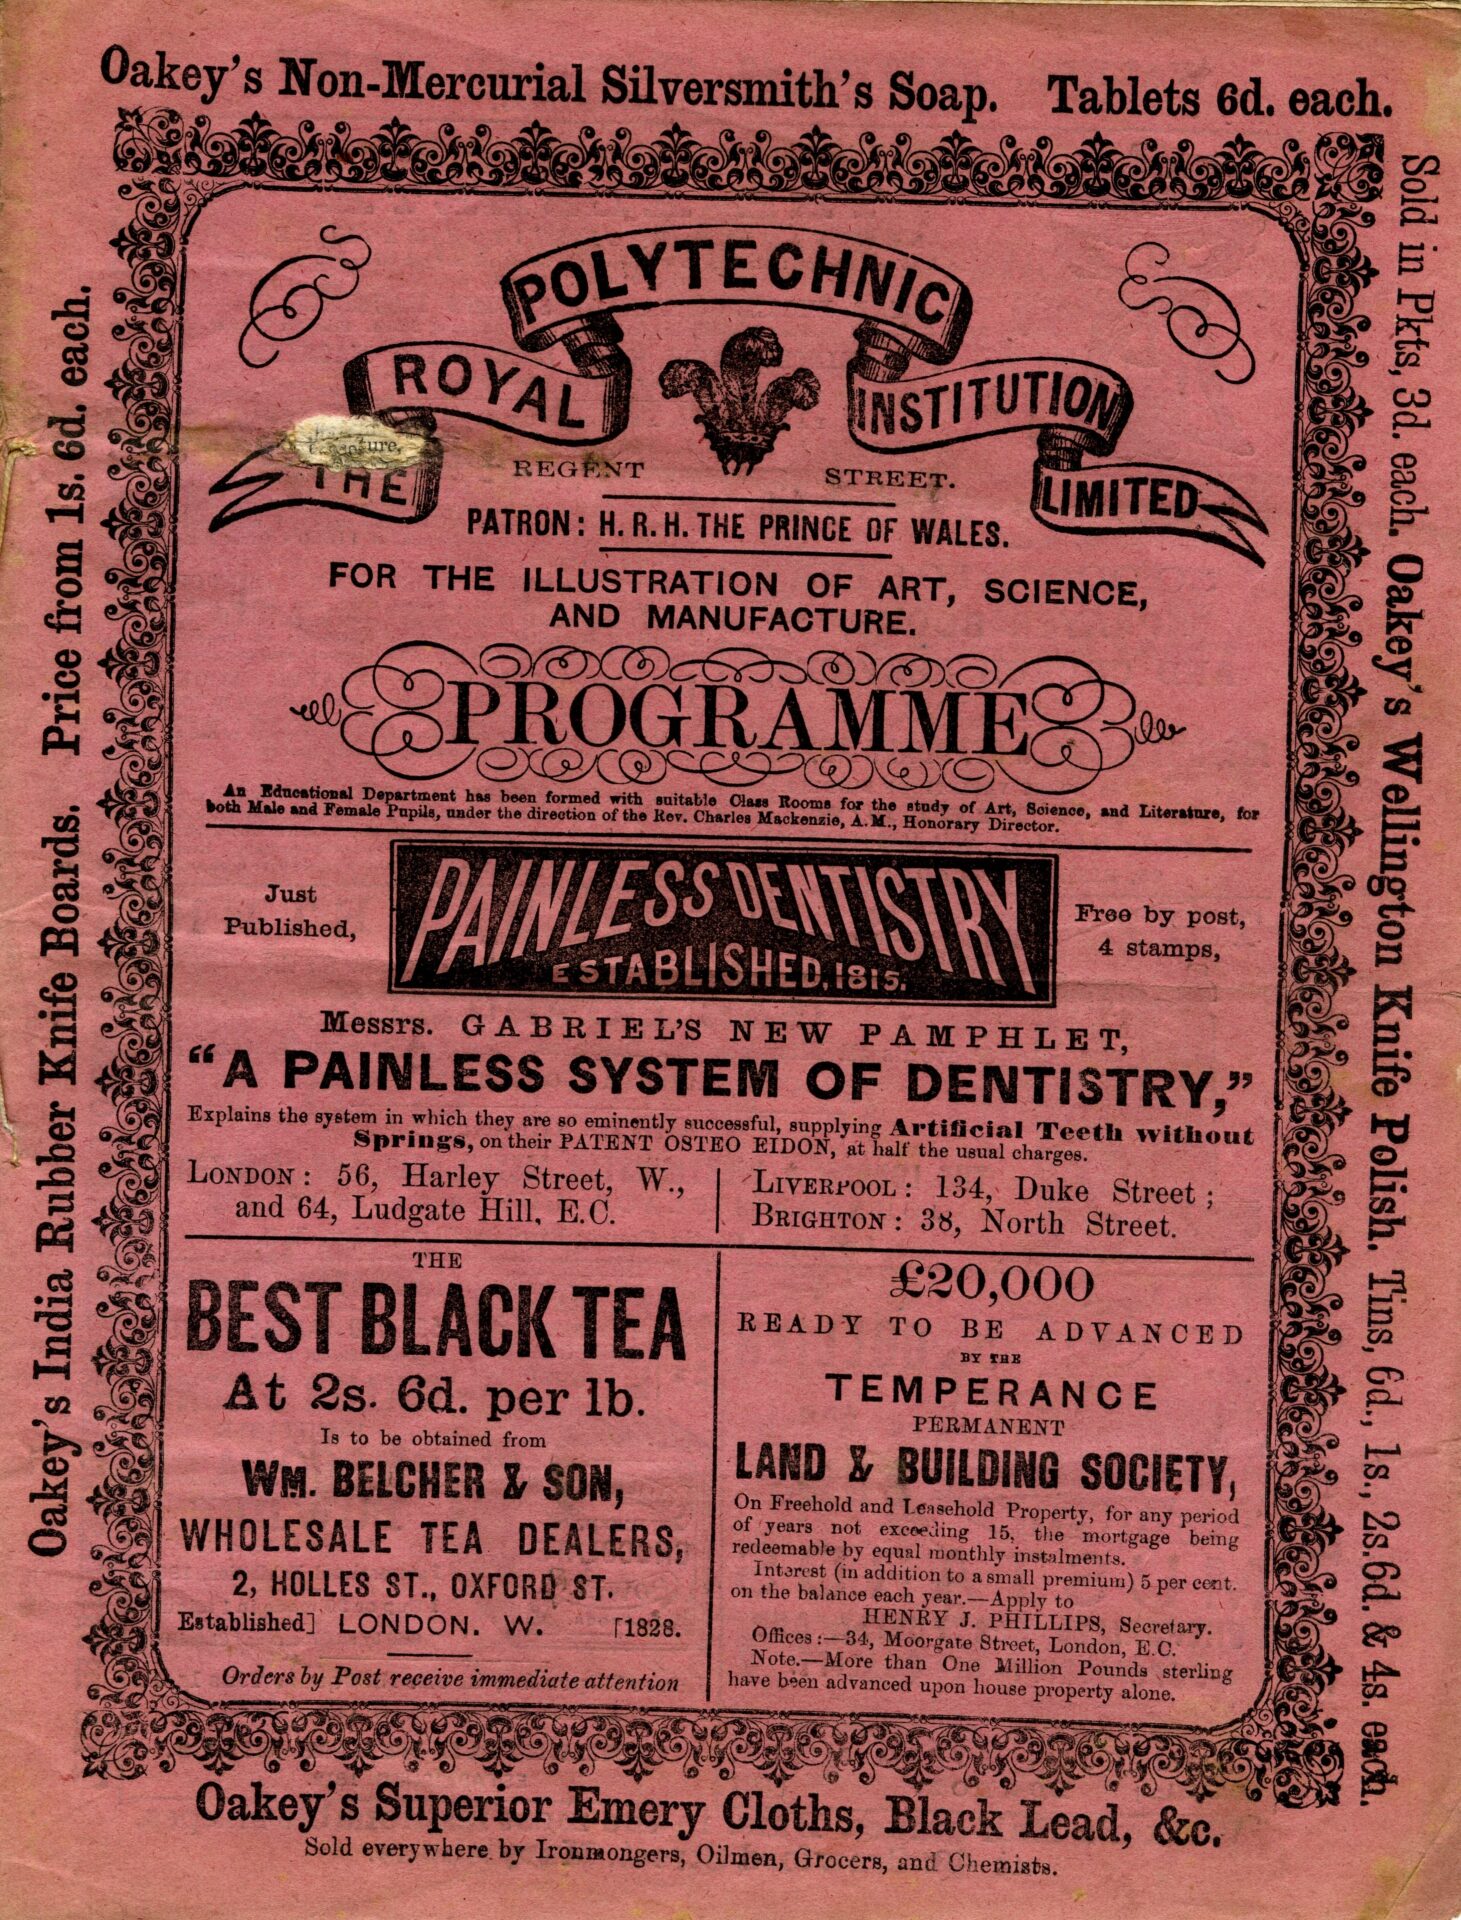 Programme for The Royal Polytechnic Institution Limited, 1868